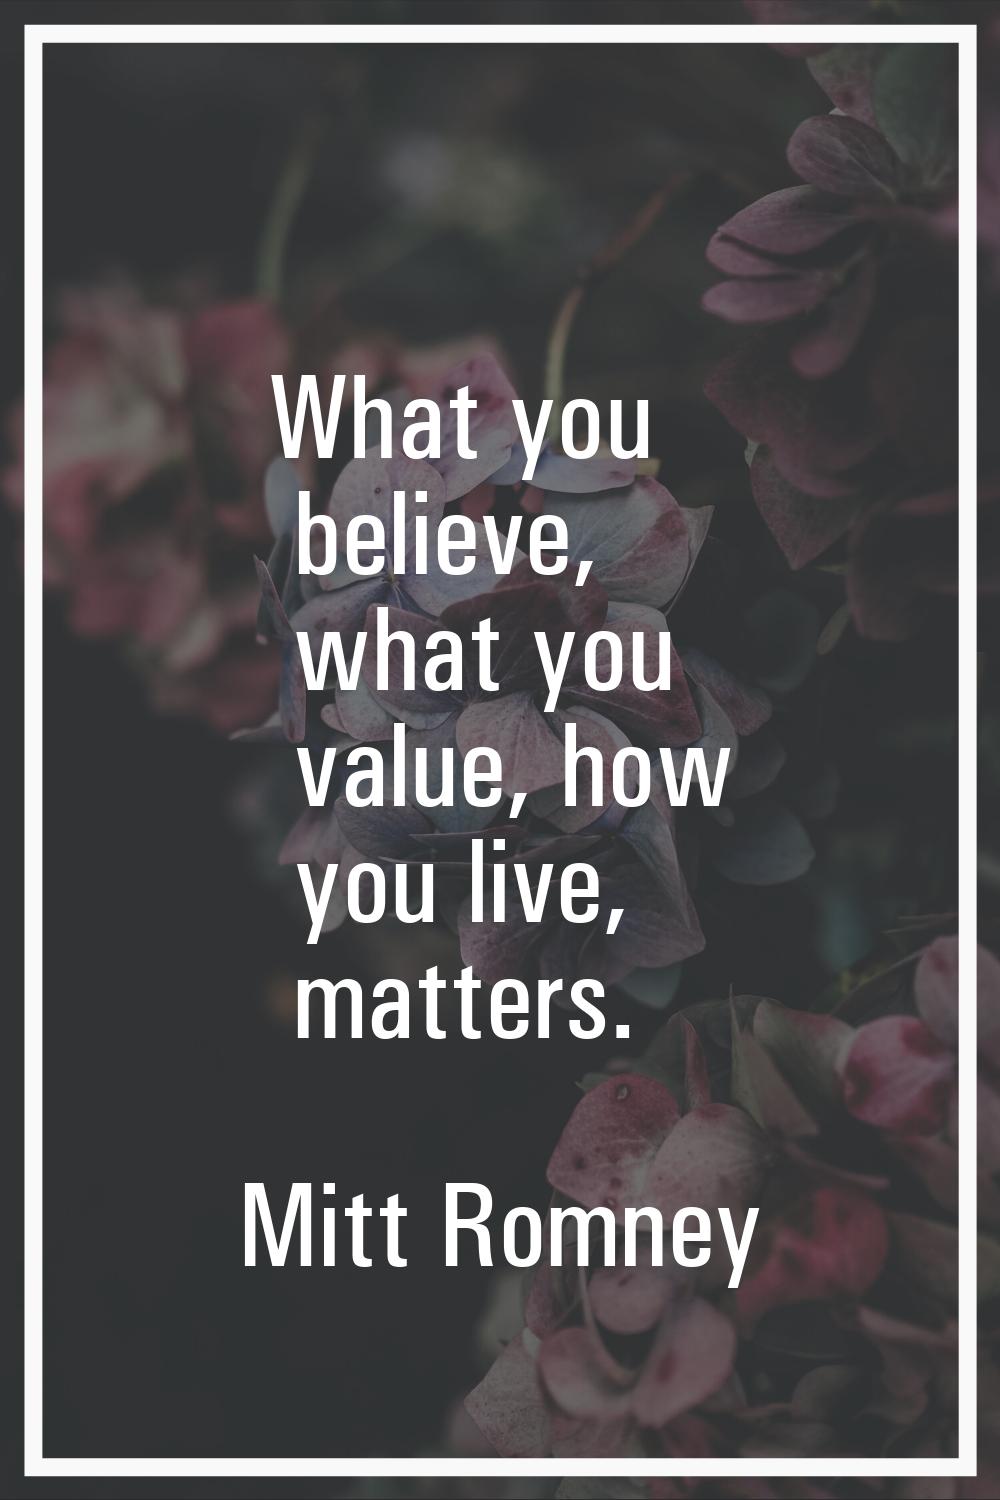 What you believe, what you value, how you live, matters.